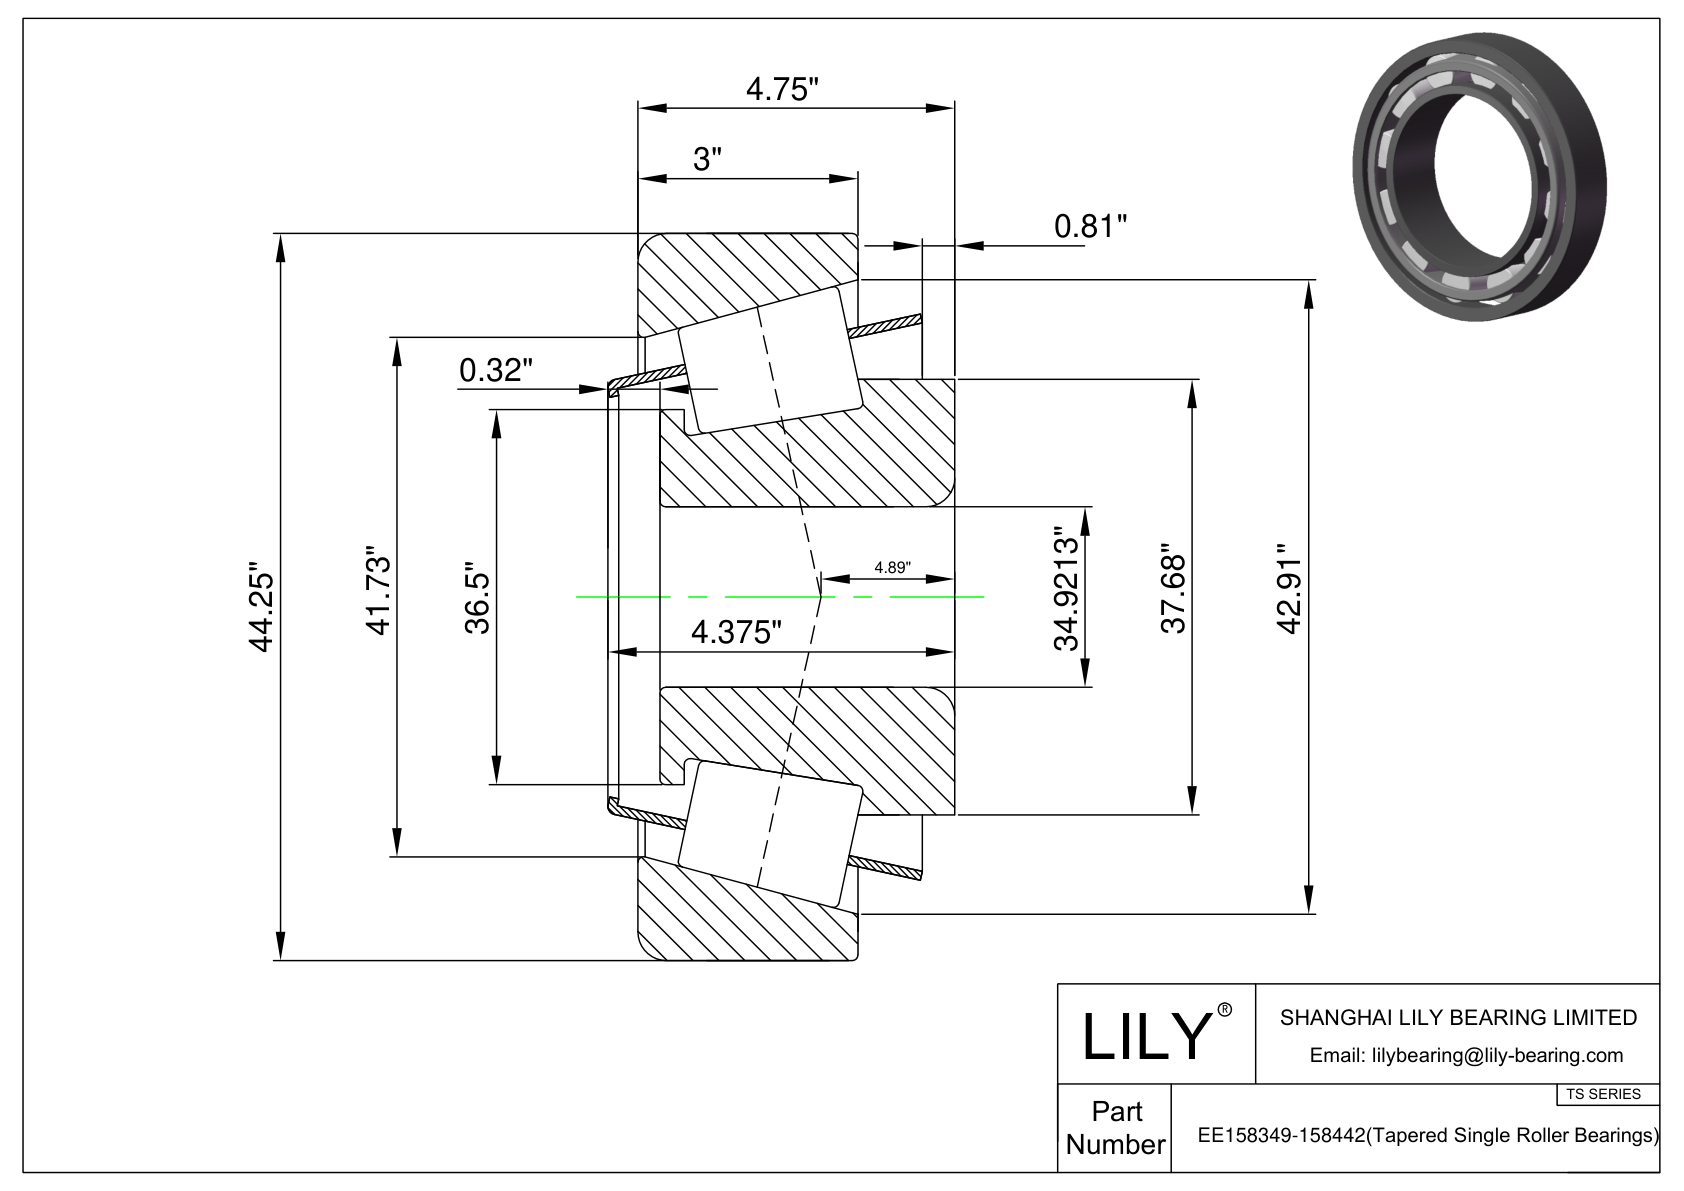 EE158349-158442 TS (Tapered Single Roller Bearings) (Imperial) cad drawing